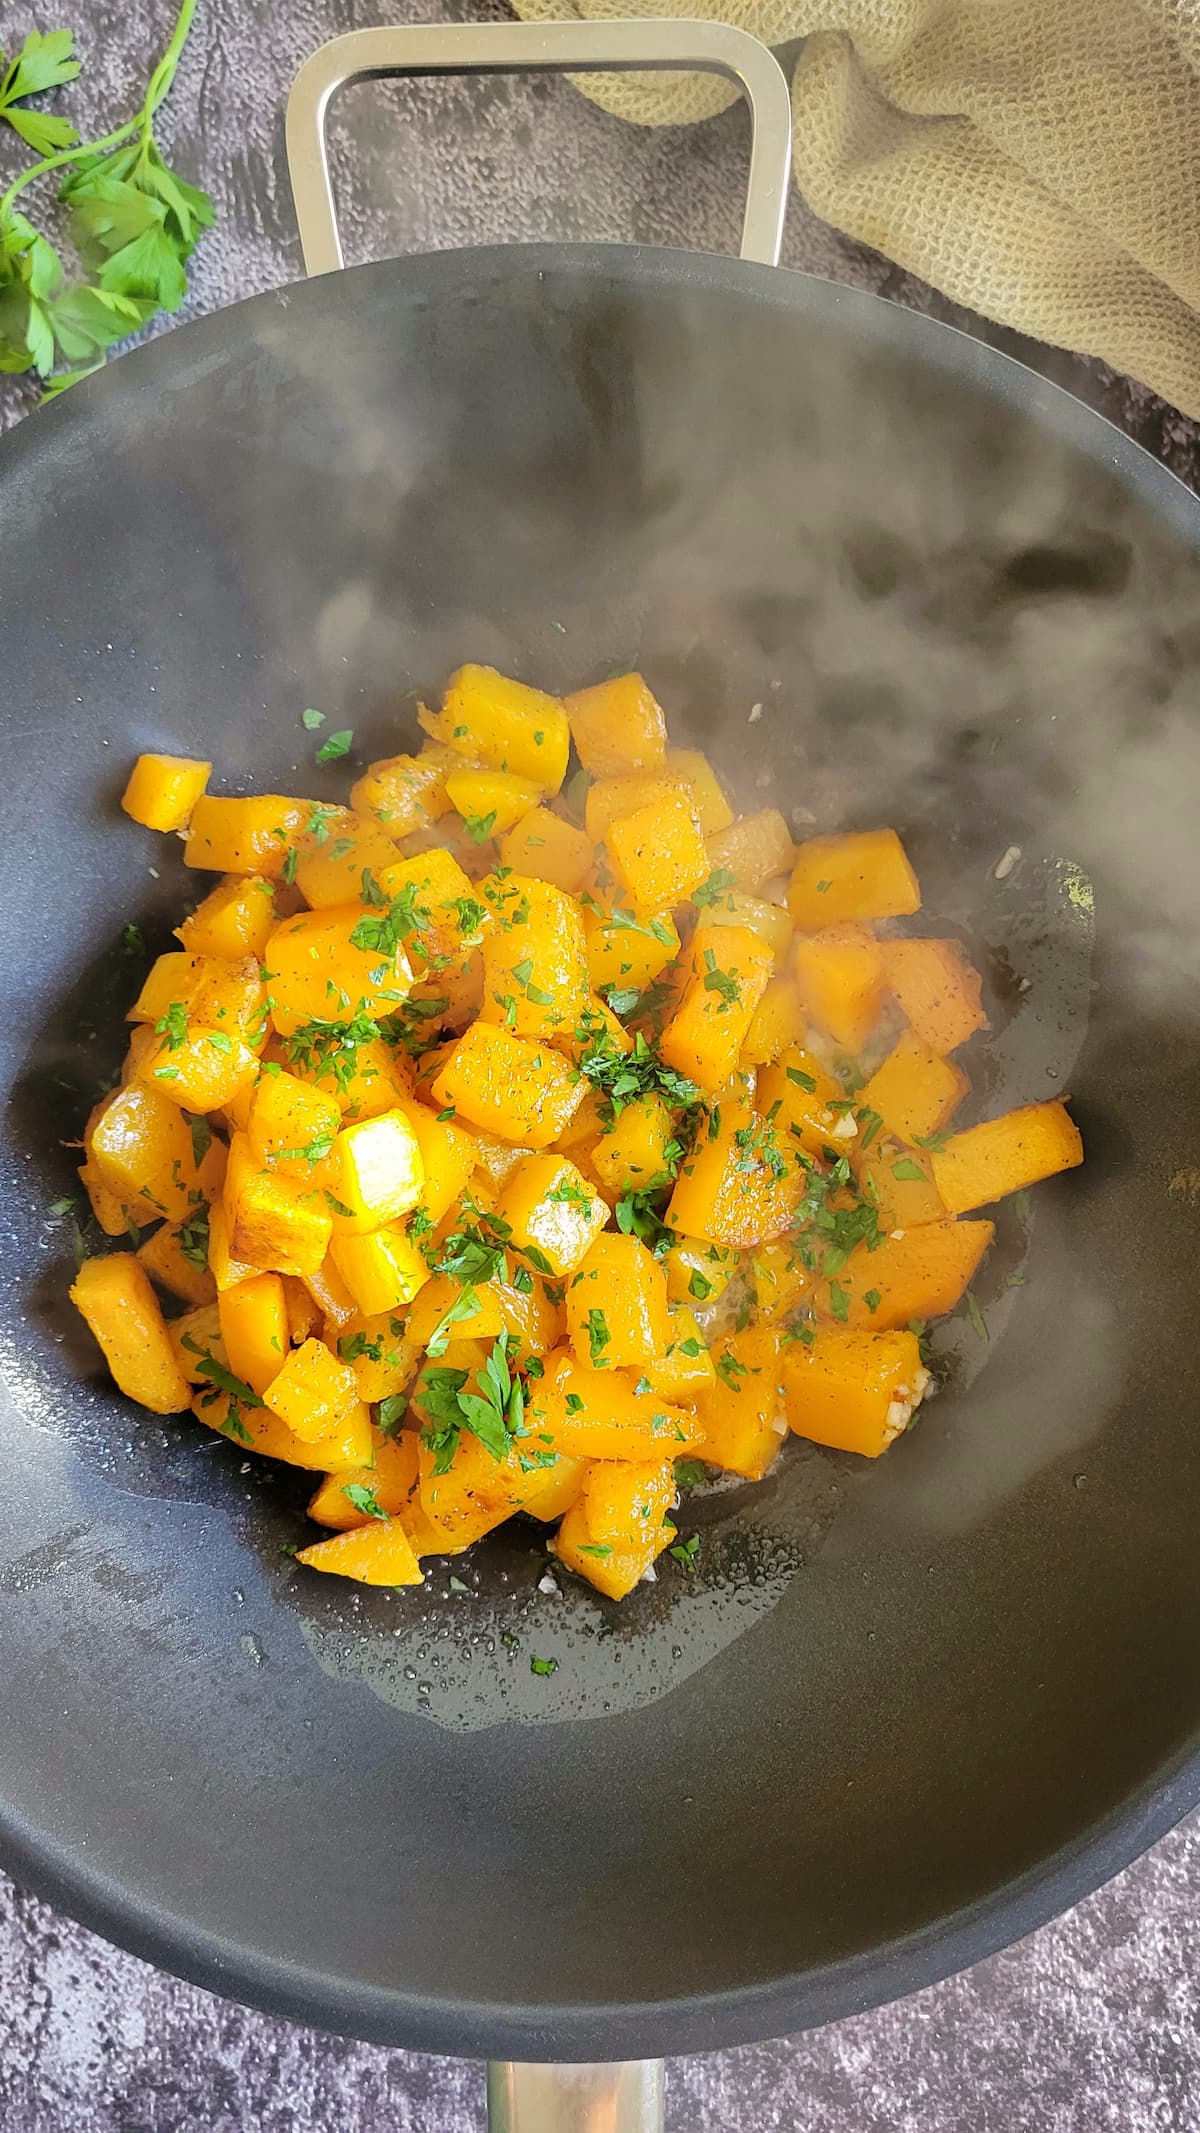 cubed butternut squash cooking in a skillet with chopped parsley